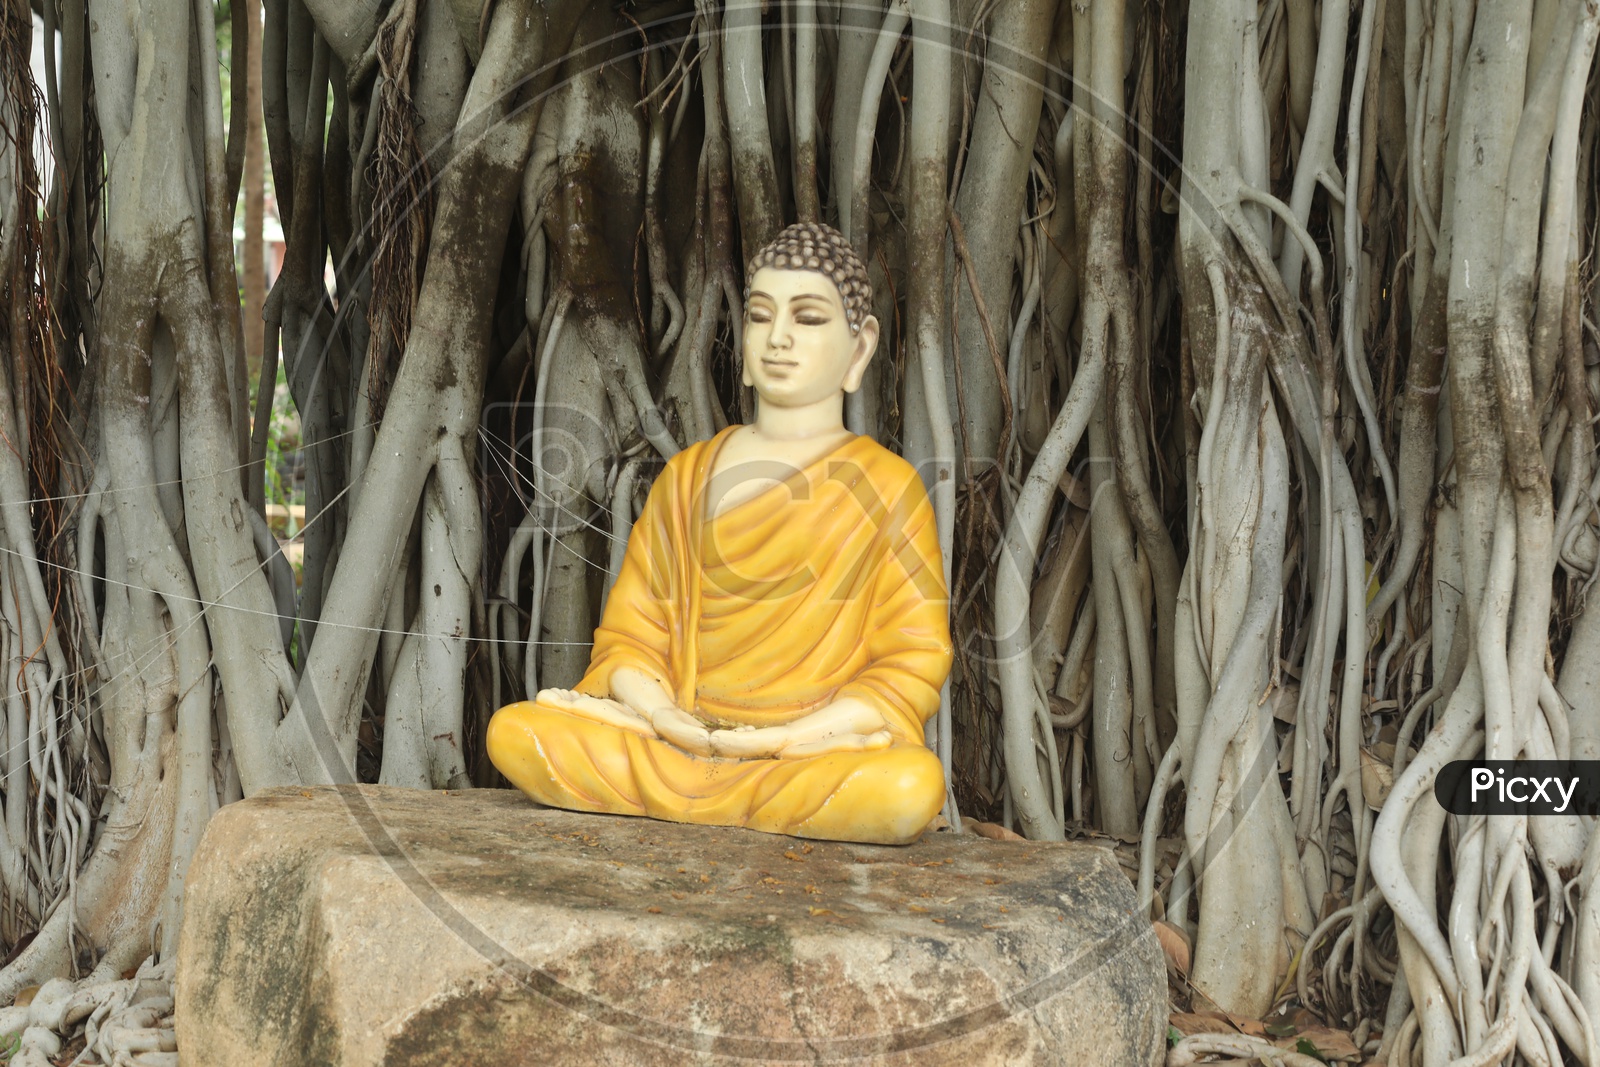 Buddha Statue In Meditation Under Banyan Tree in a Park